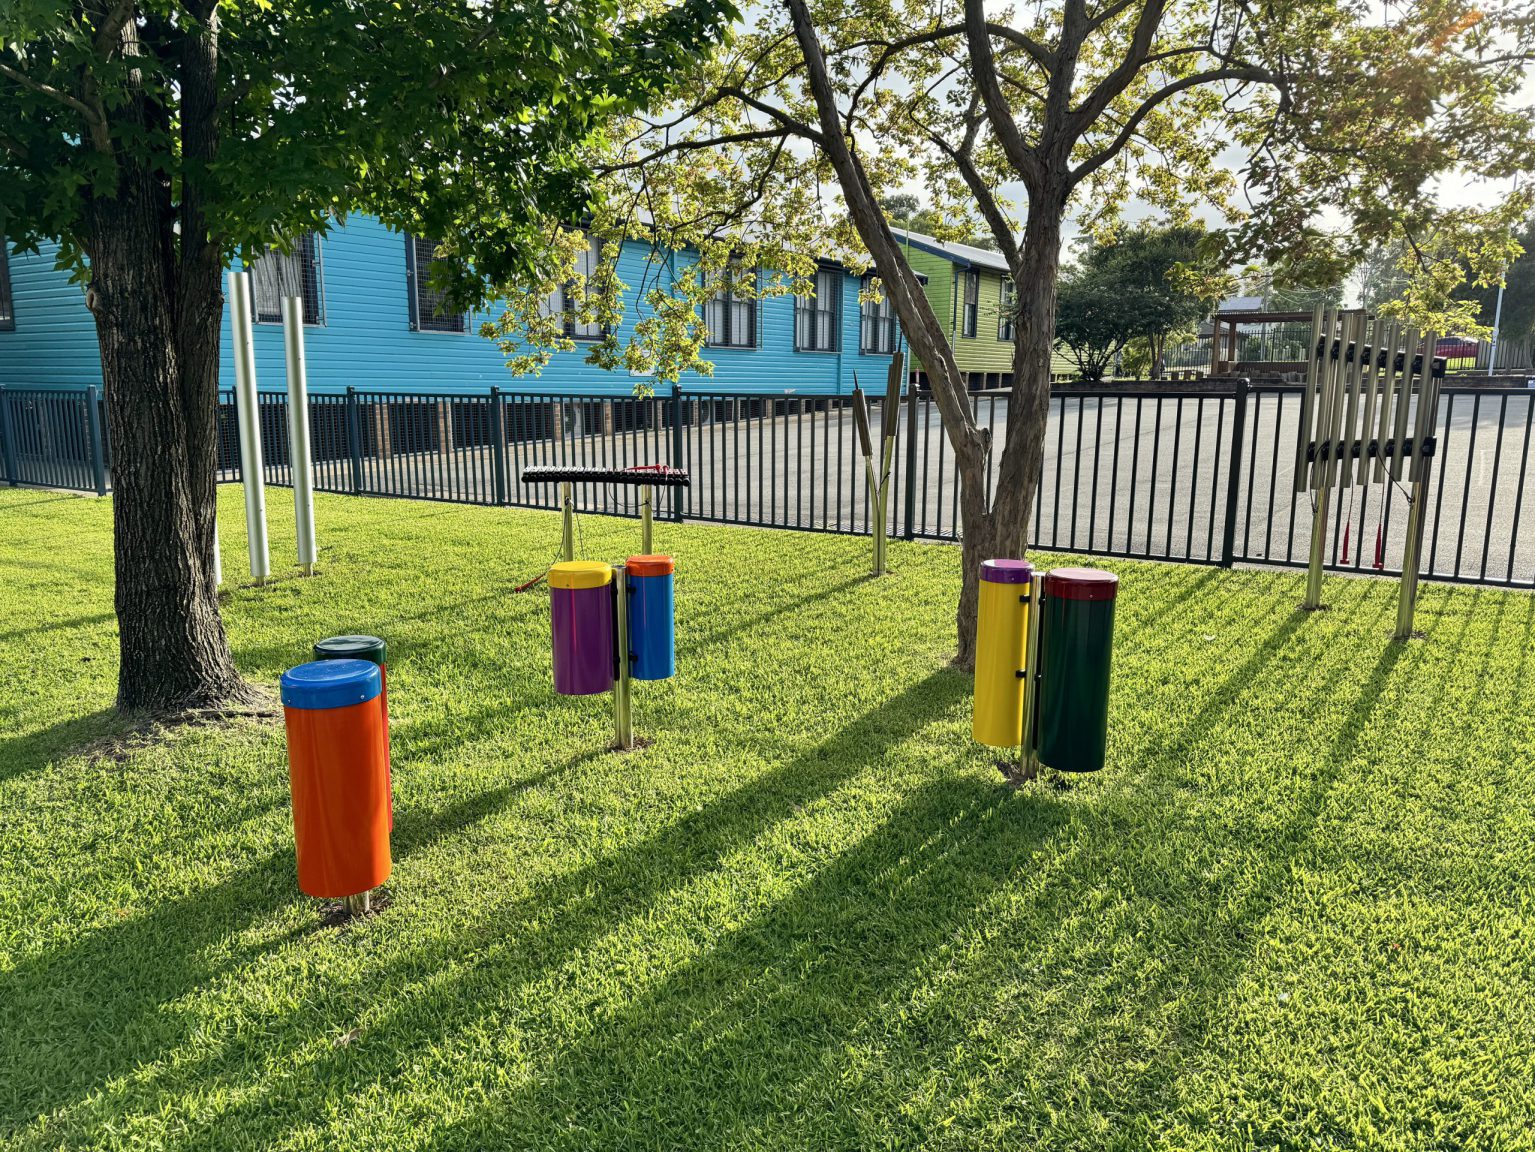 Outdoor musical instruments installed in a school playground on the grass under some trees